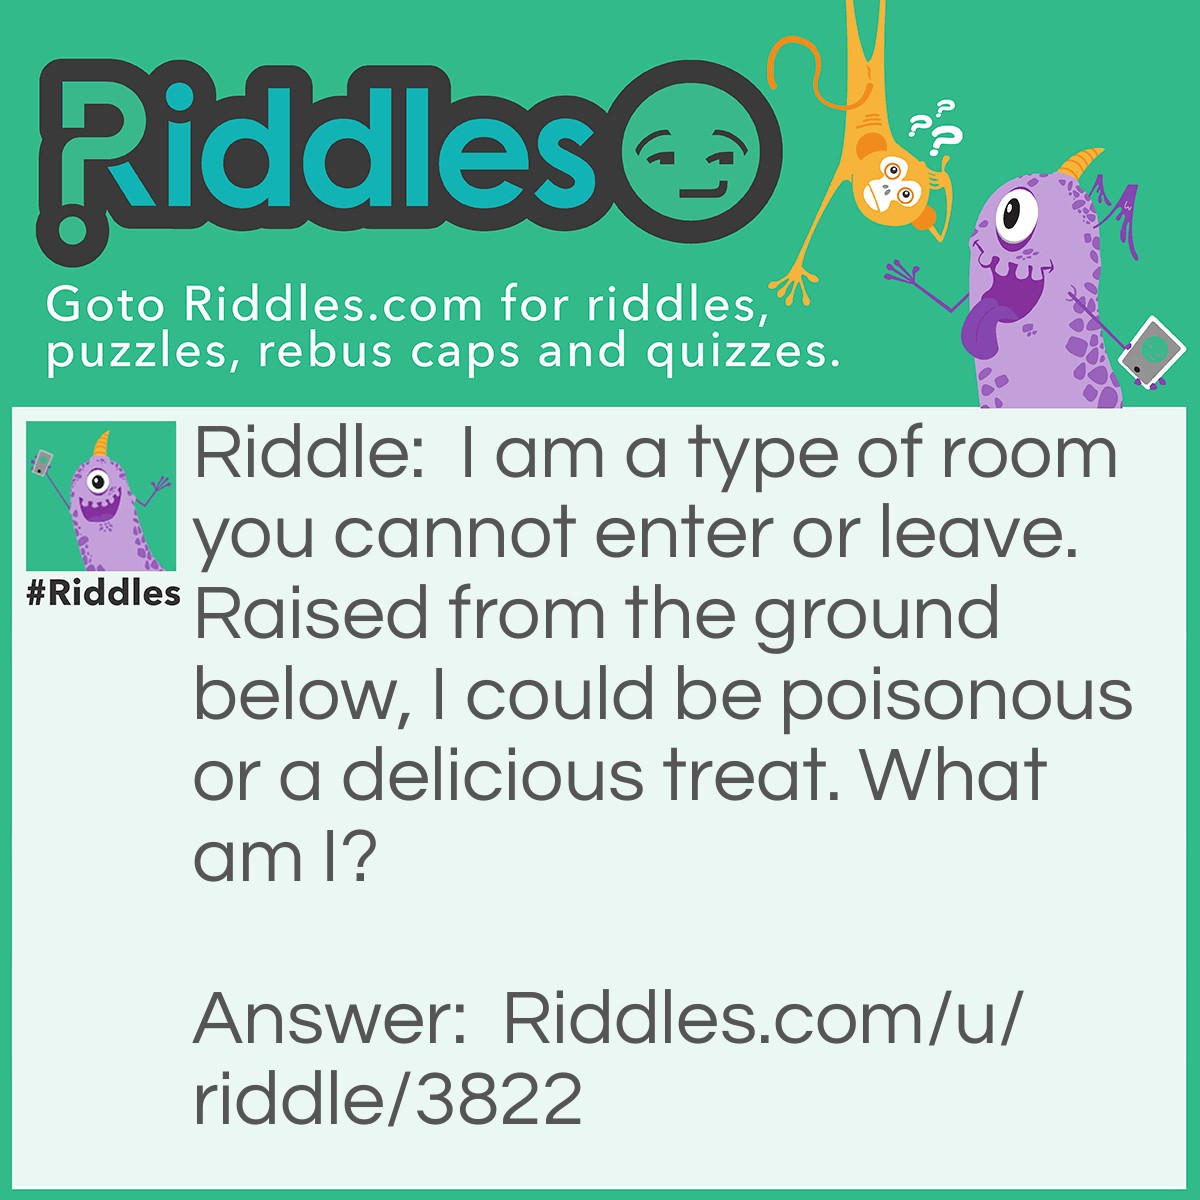 Riddle: I am a type of room you cannot enter or leave. Raised from the ground below, I could be poisonous or a delicious treat. What am I? Answer: Mushroom.